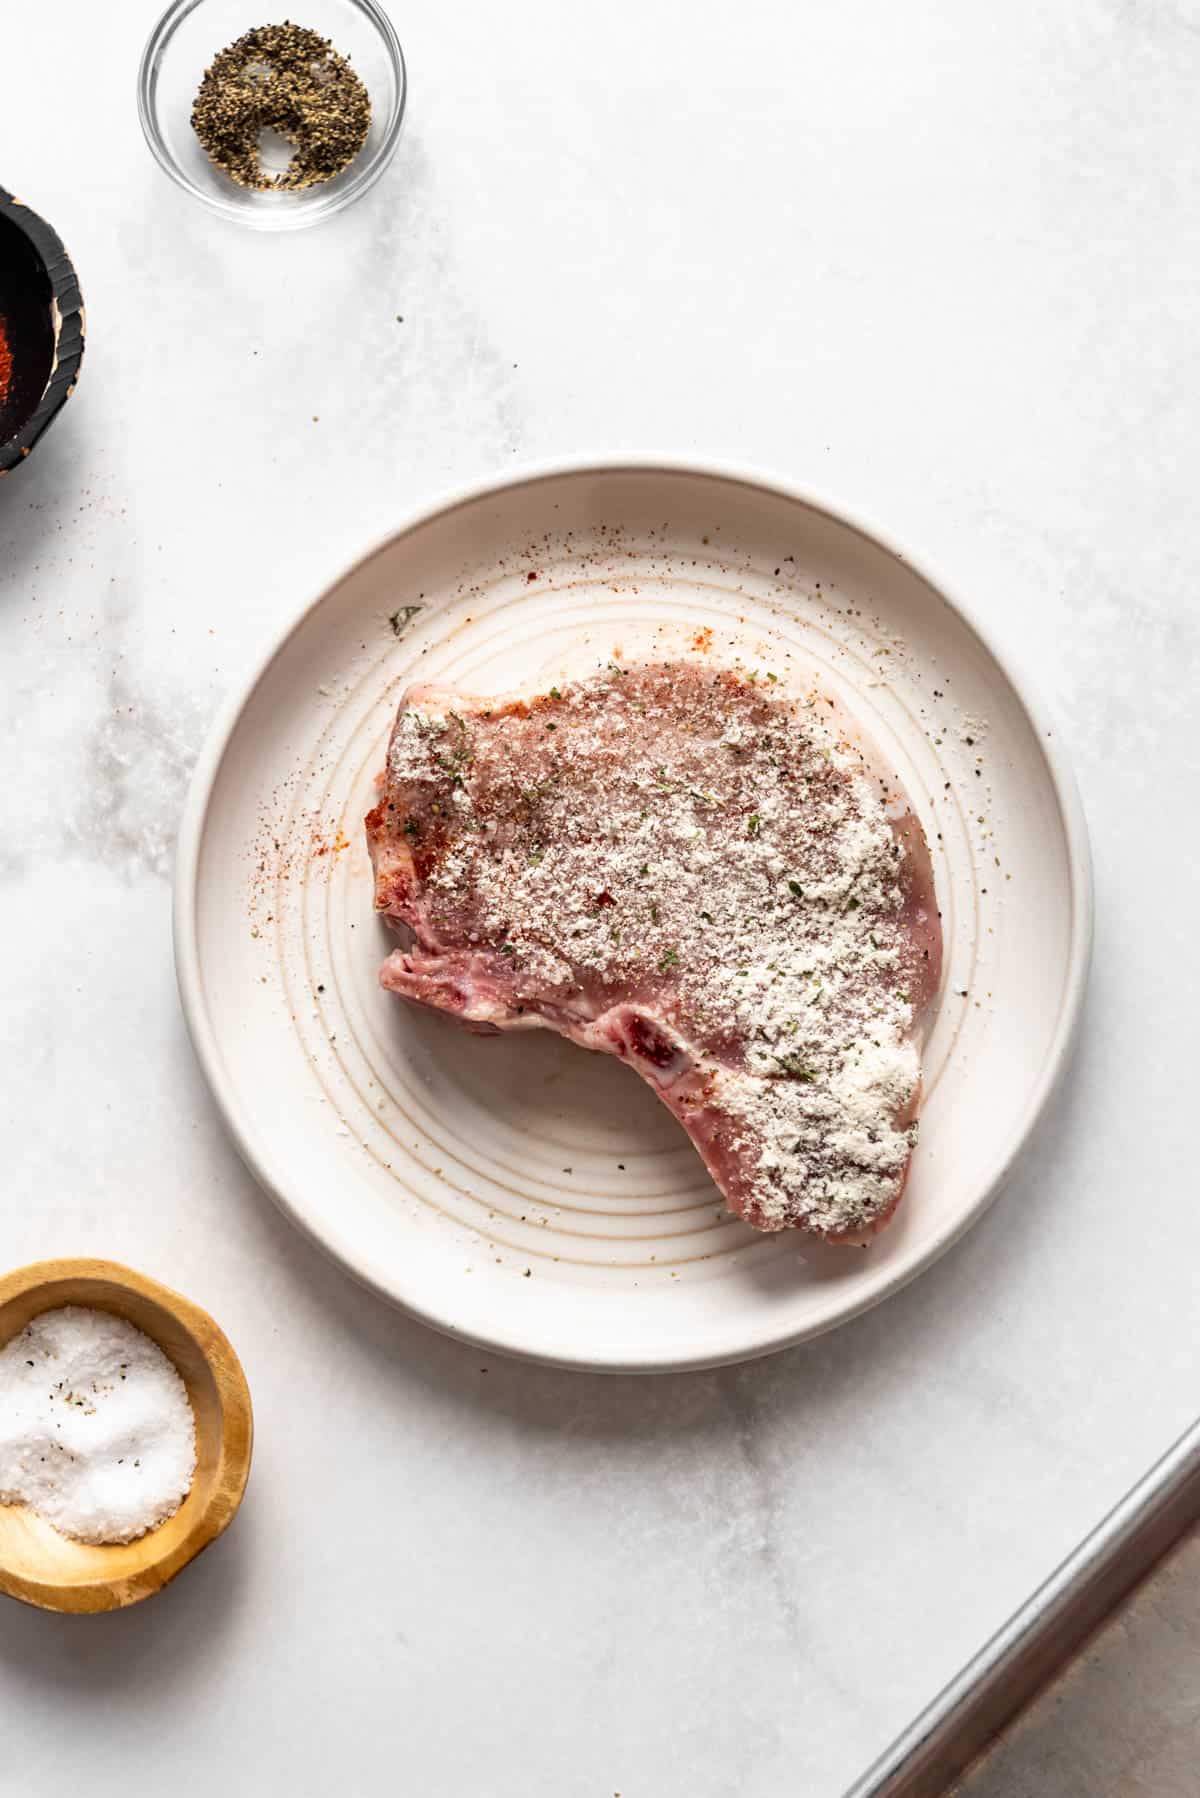 A bone-in pork chop on a plate seasoned with dry powdered ranch dressing mix.